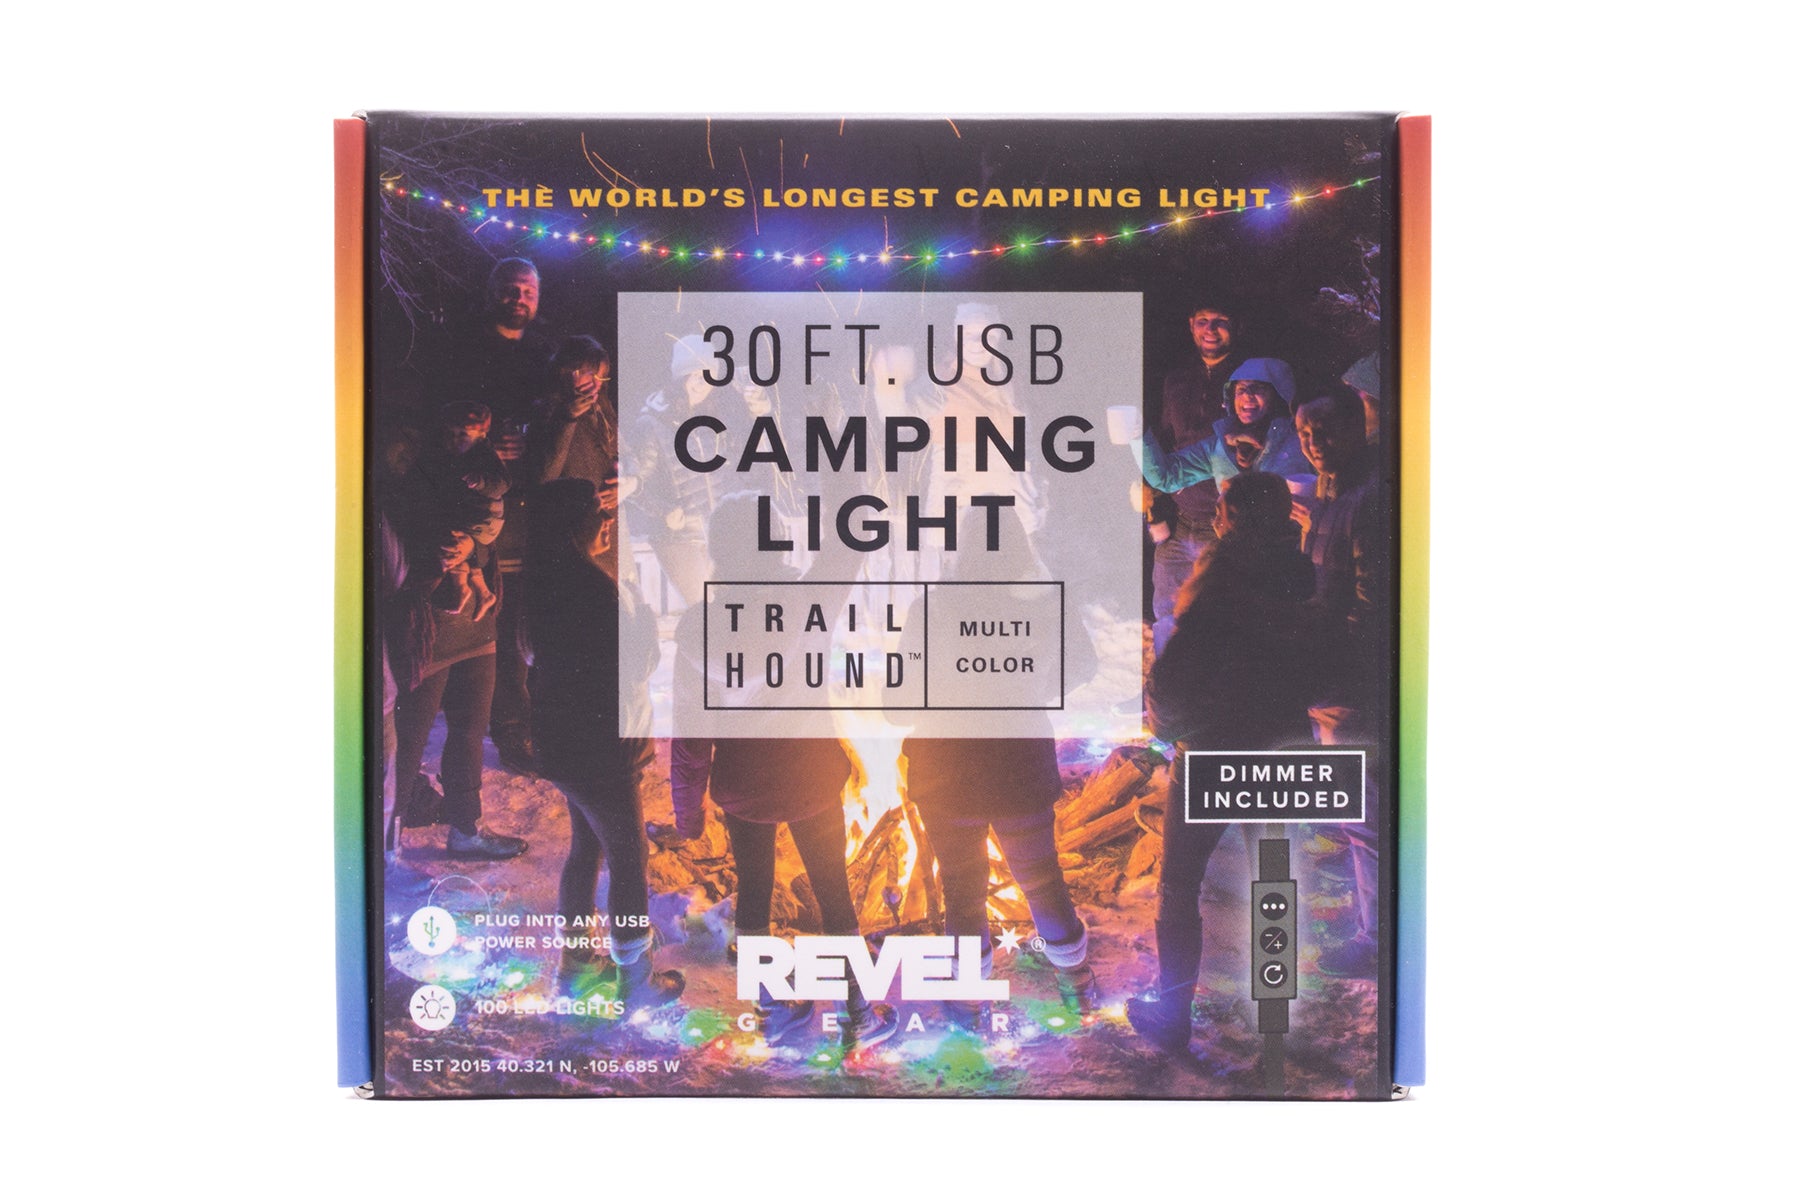 Revel Gear Trail Hound 30ft Camping Light Multi-Color with Dimmer